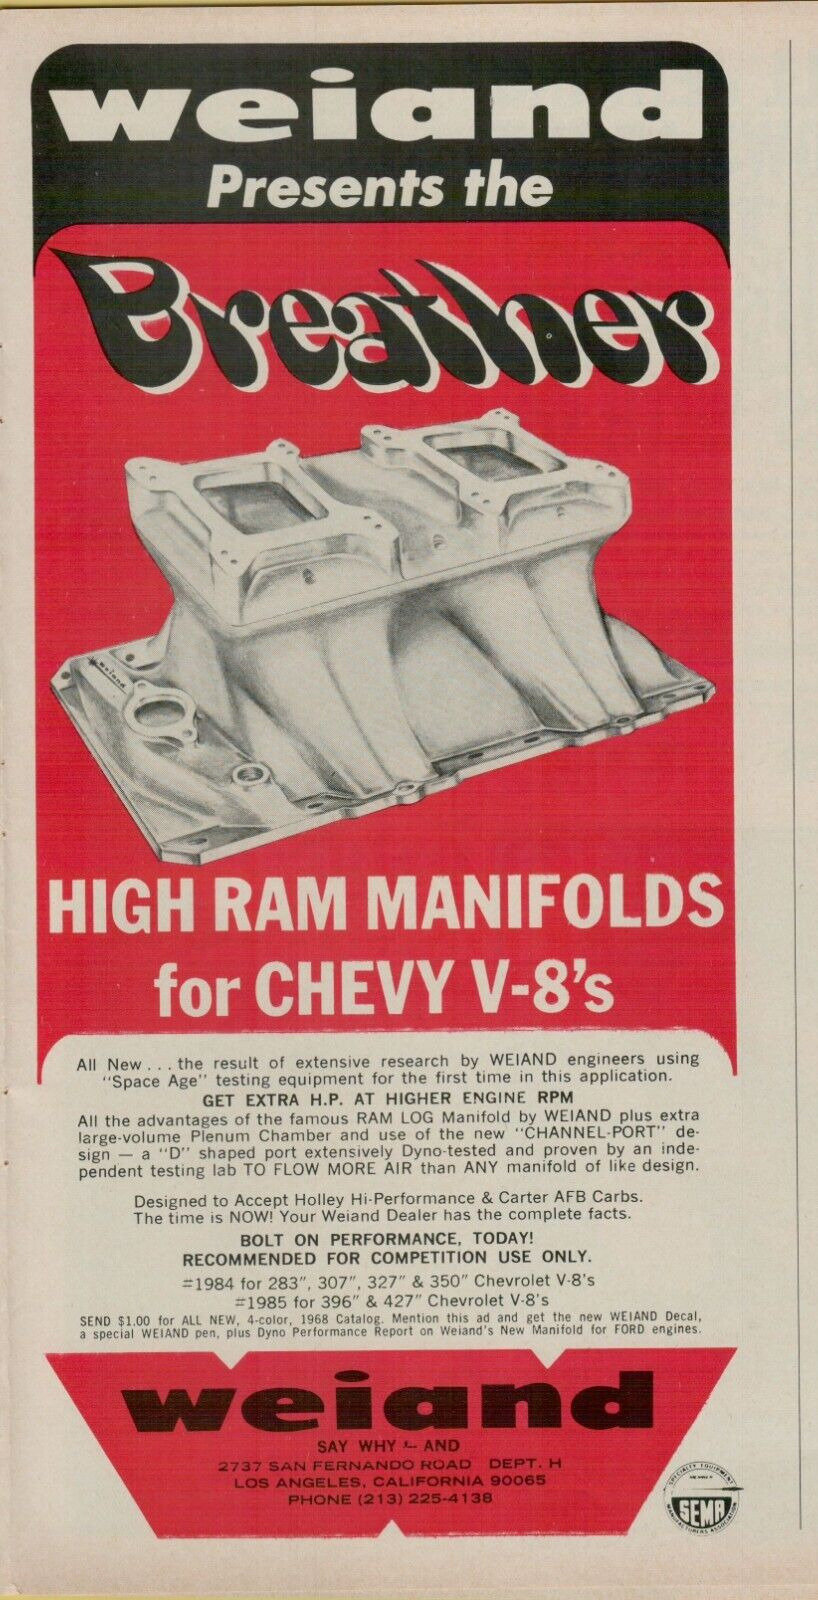 1969 Weiand Breather High Ram Manifolds for Chevy V-8\'s More HP VINTAGE PRINT AD